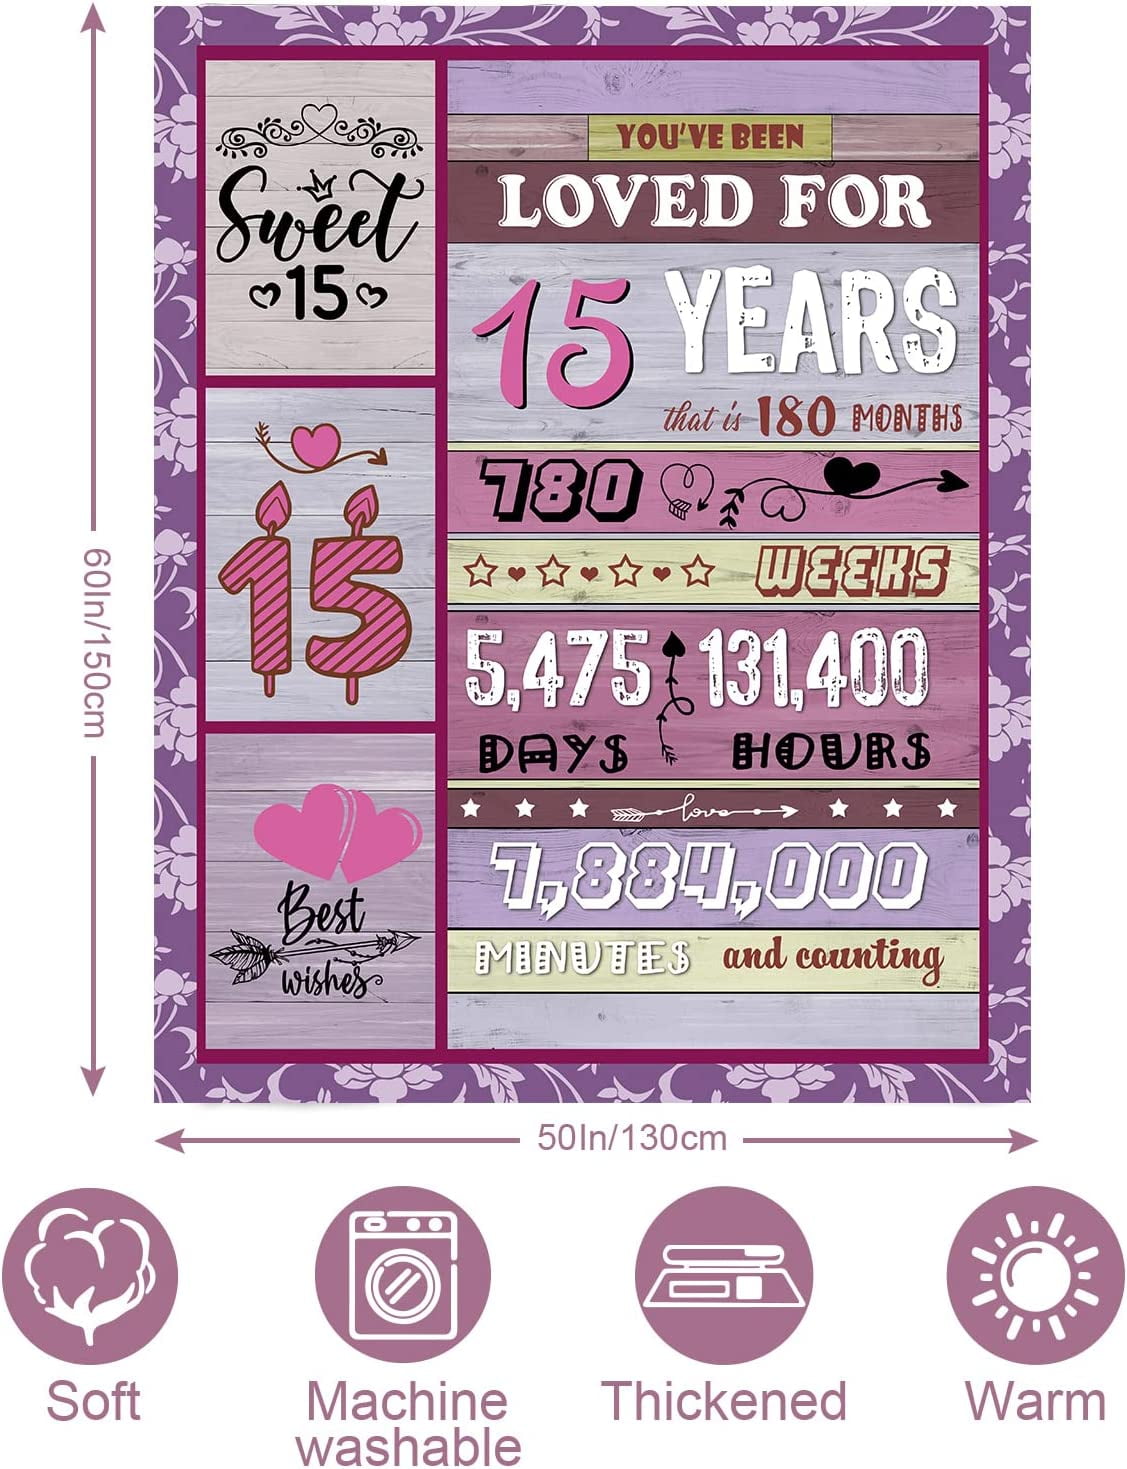  Peliny Chrid Quinceanera Gifts Blanket - 15 Year Old